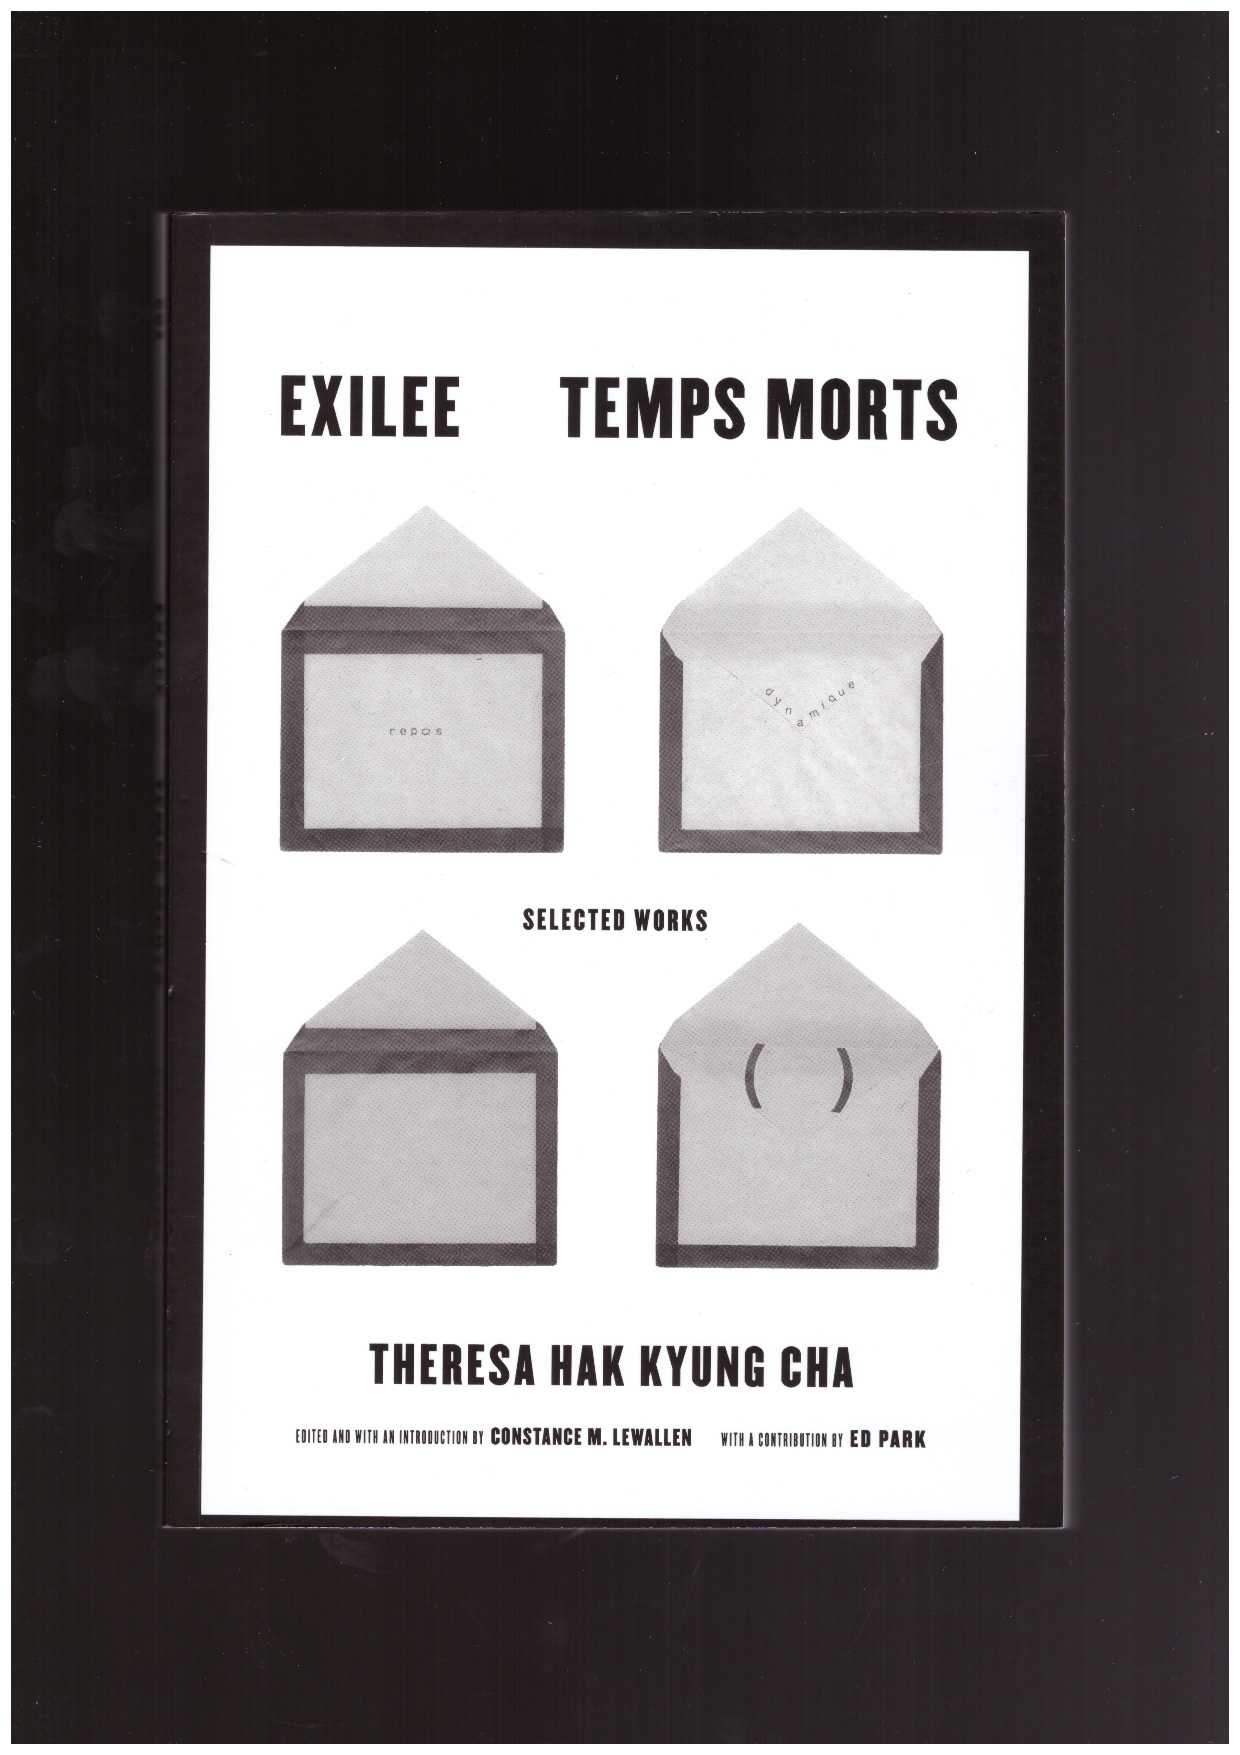 HAK KYUNG CHA, Theresa; LEWALLEN, Constance M. (ed.) - Exilee. Temps Morts. Selected Writings